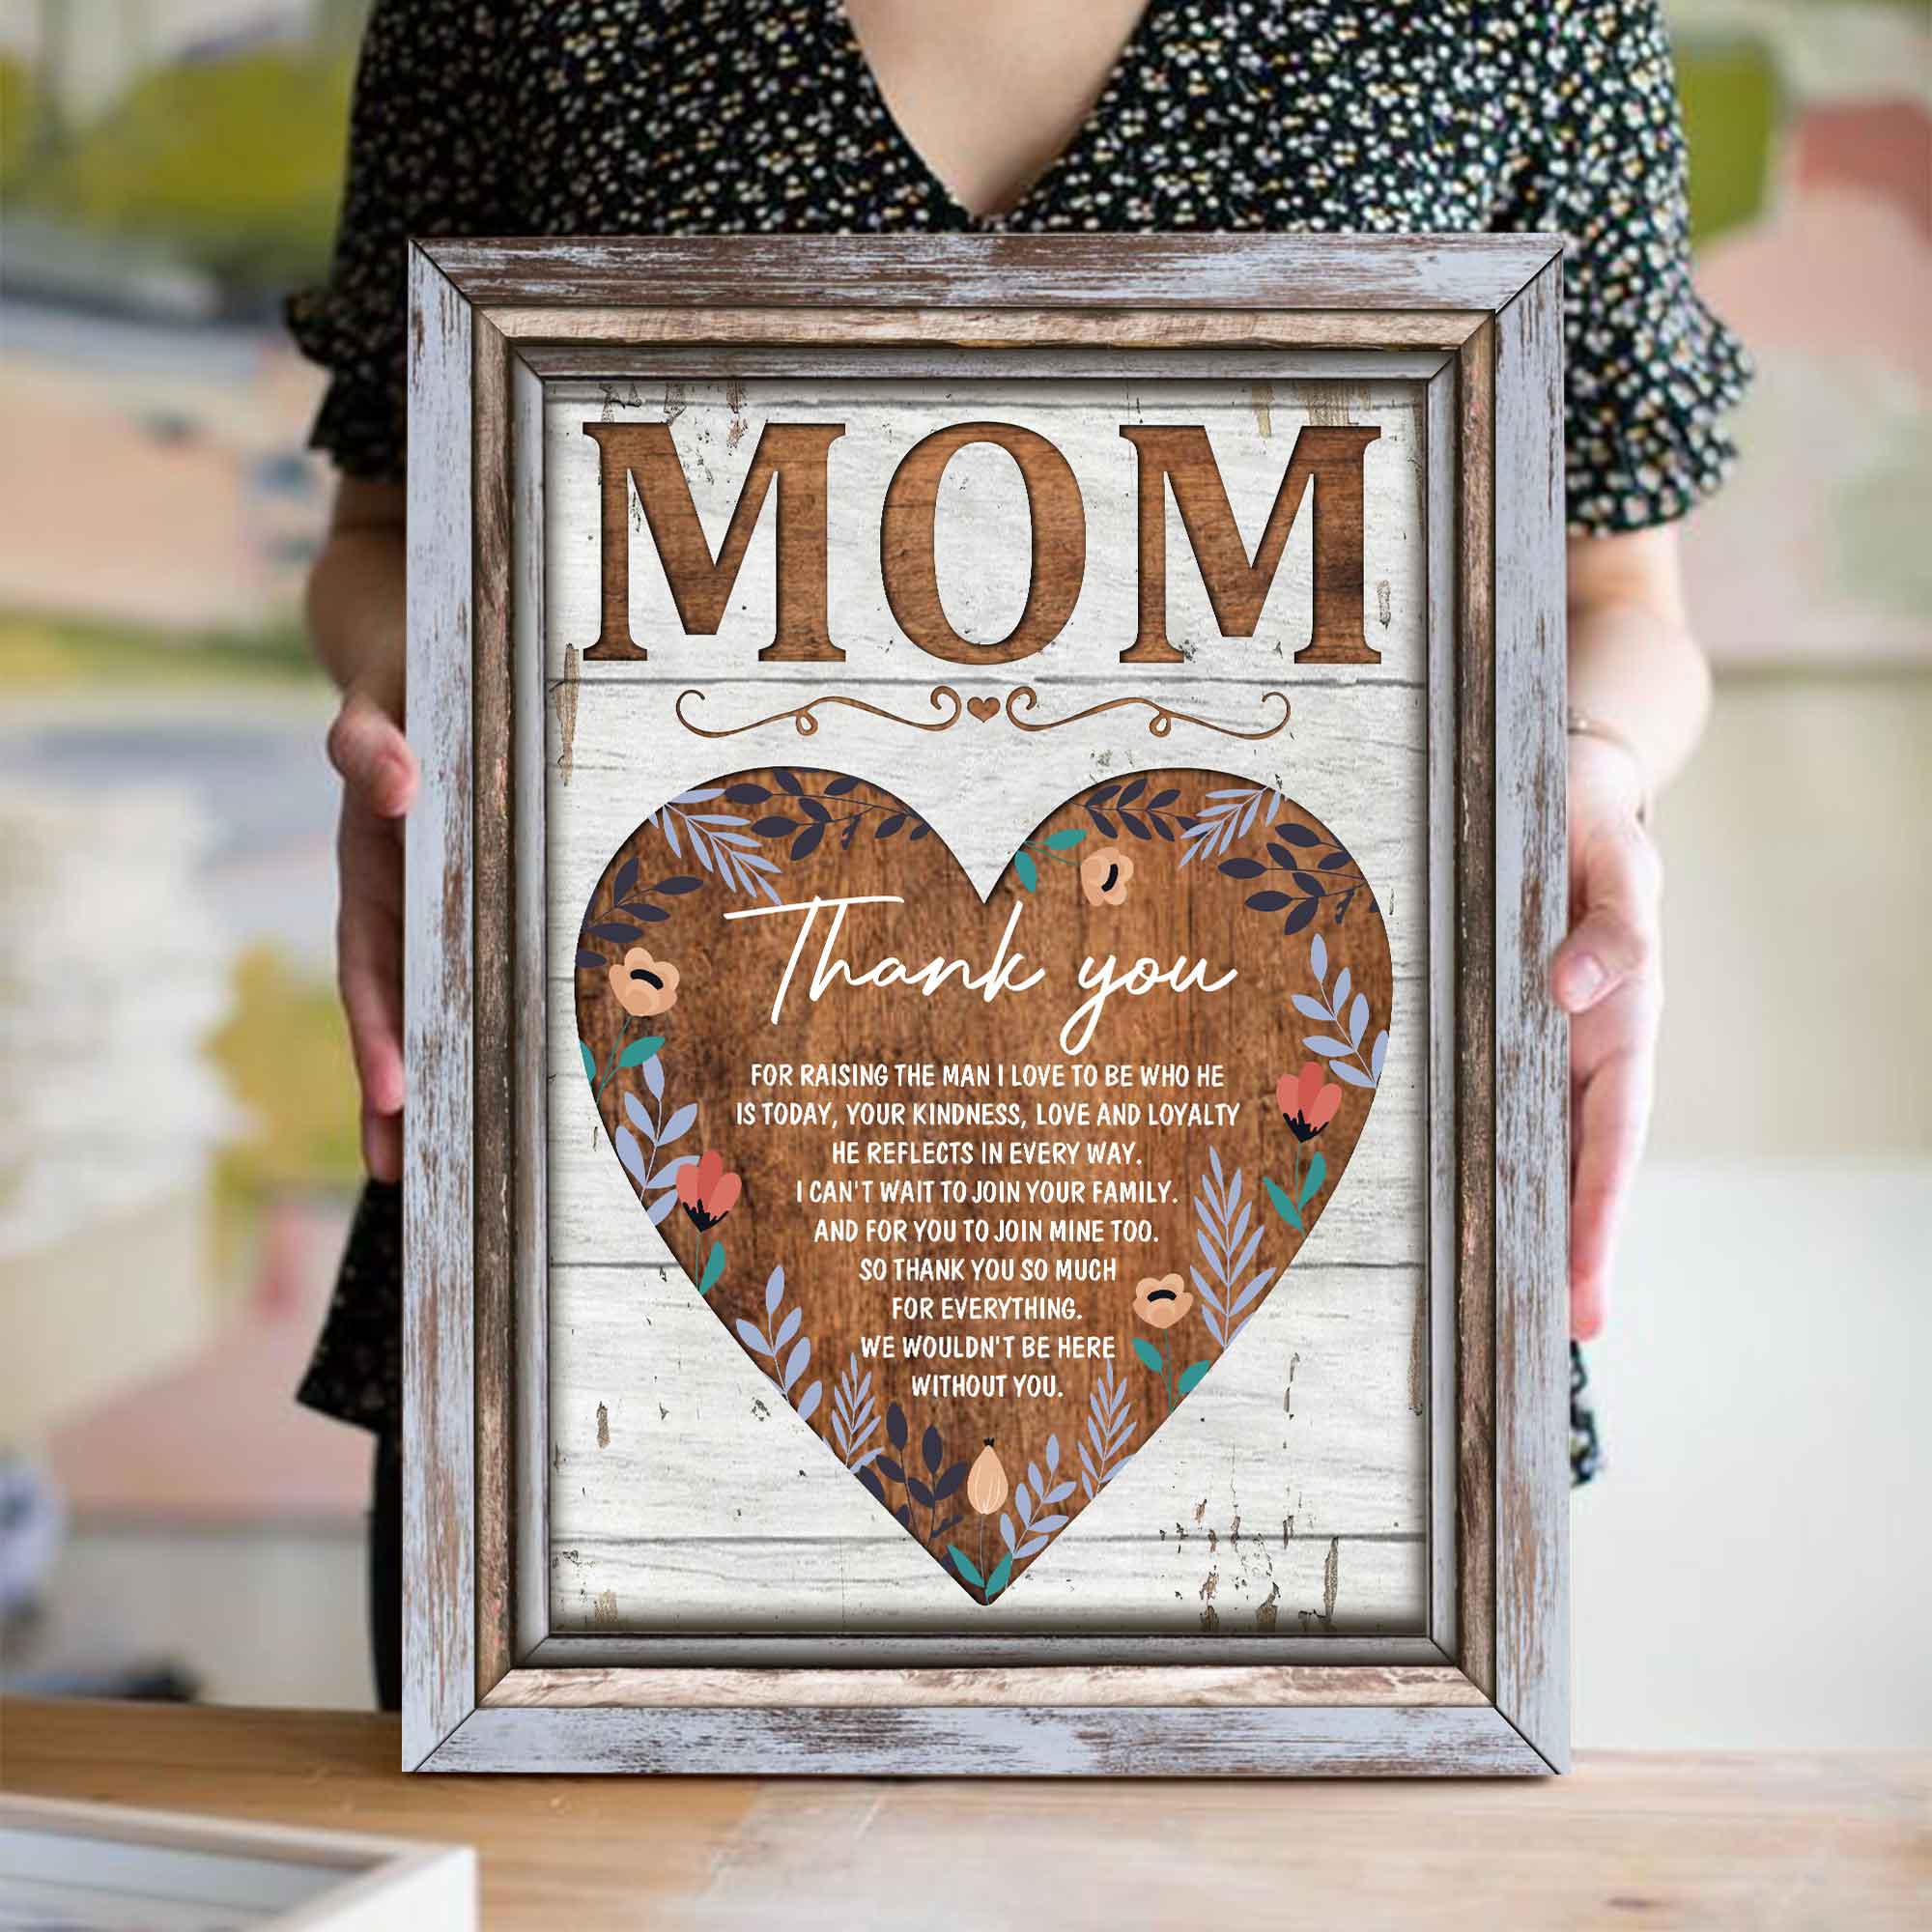 Unique Gifts for Mom Gift Ideas for Mom Mother of the Bride Custom